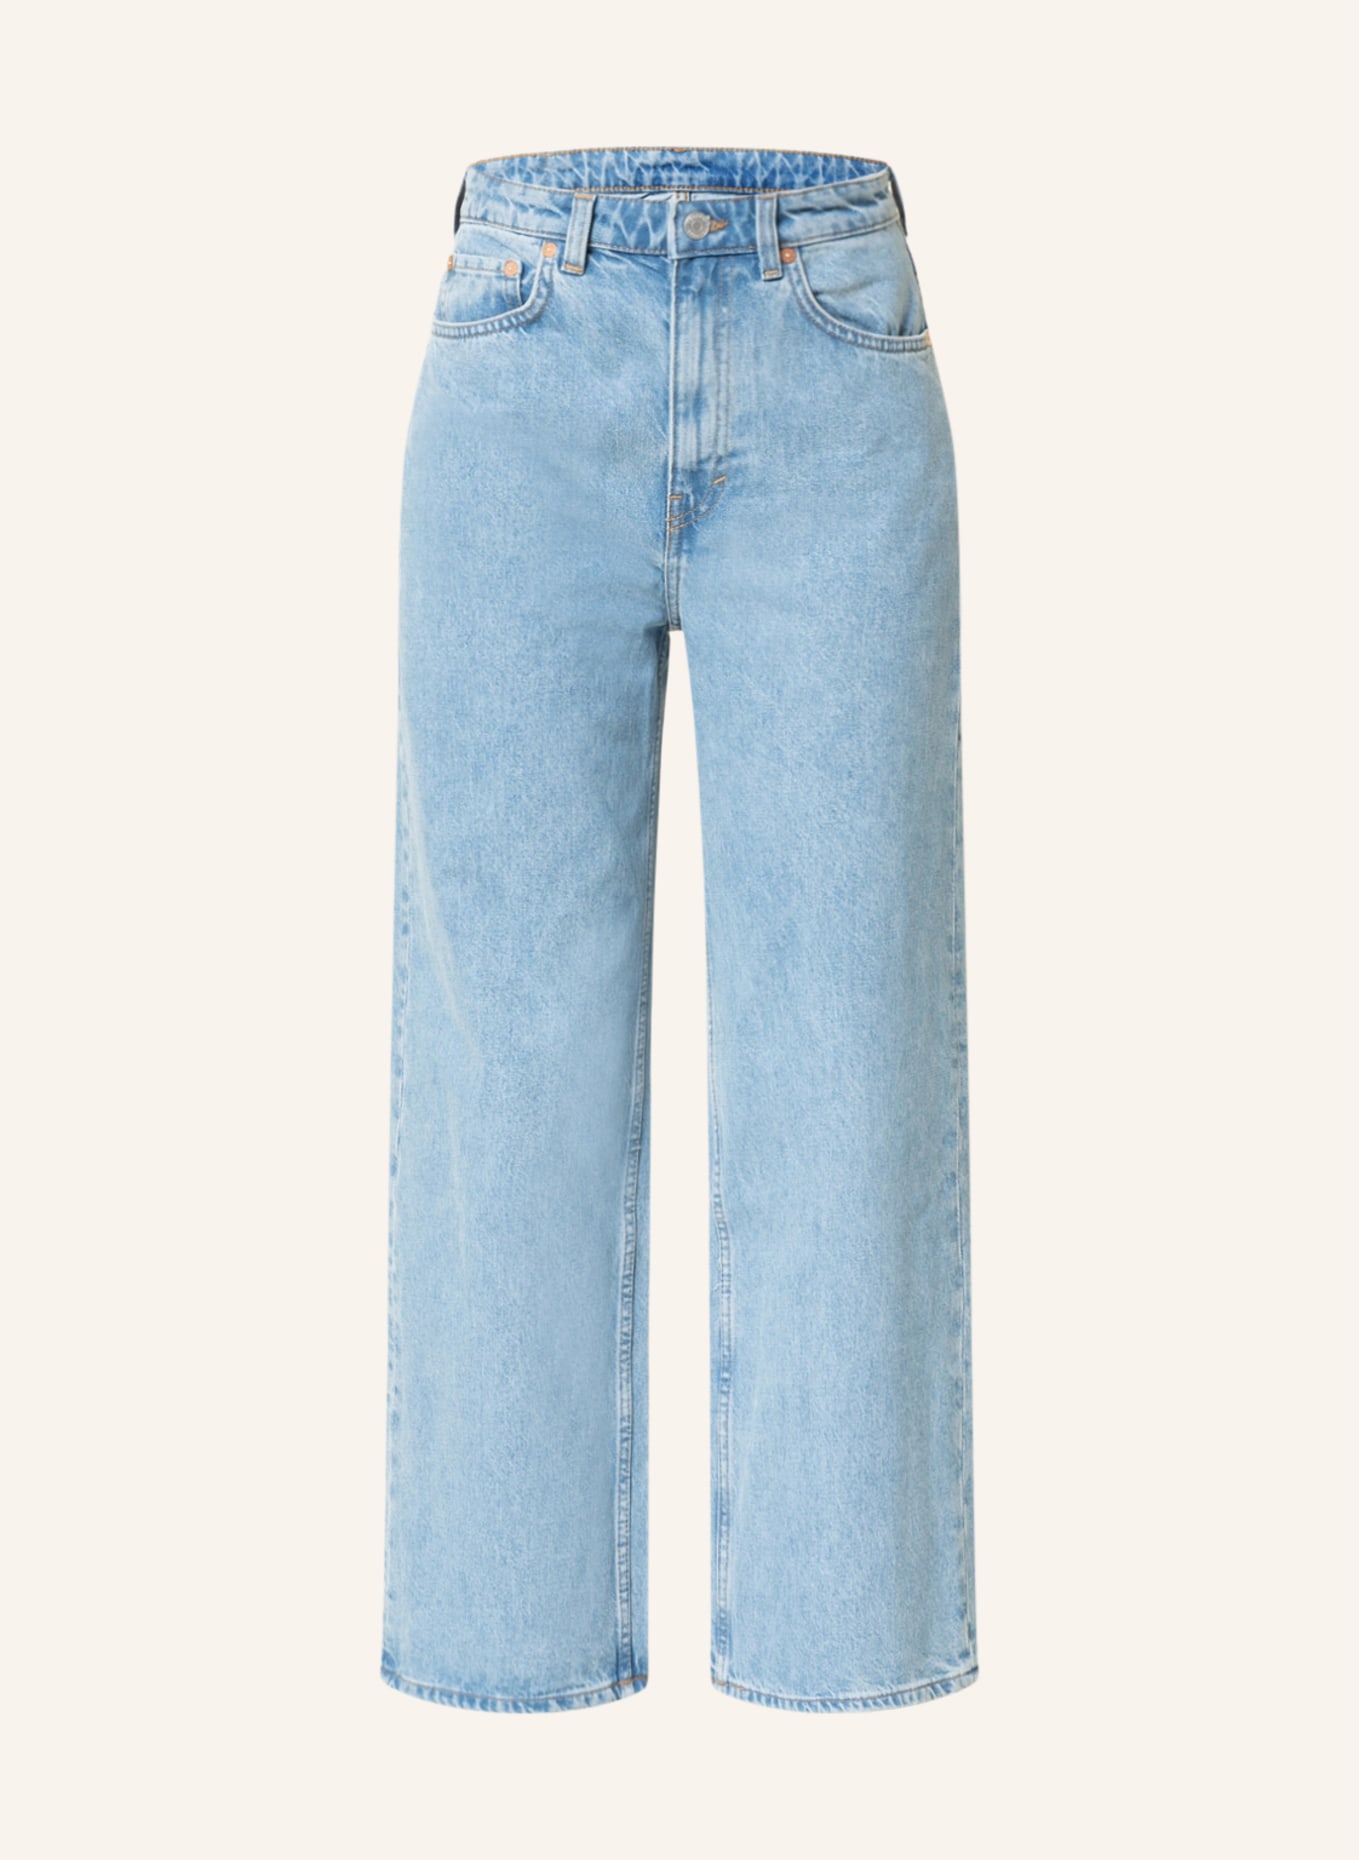 At placere porter fugl WEEKDAY Jeans ACE in 017 blue medium dusty